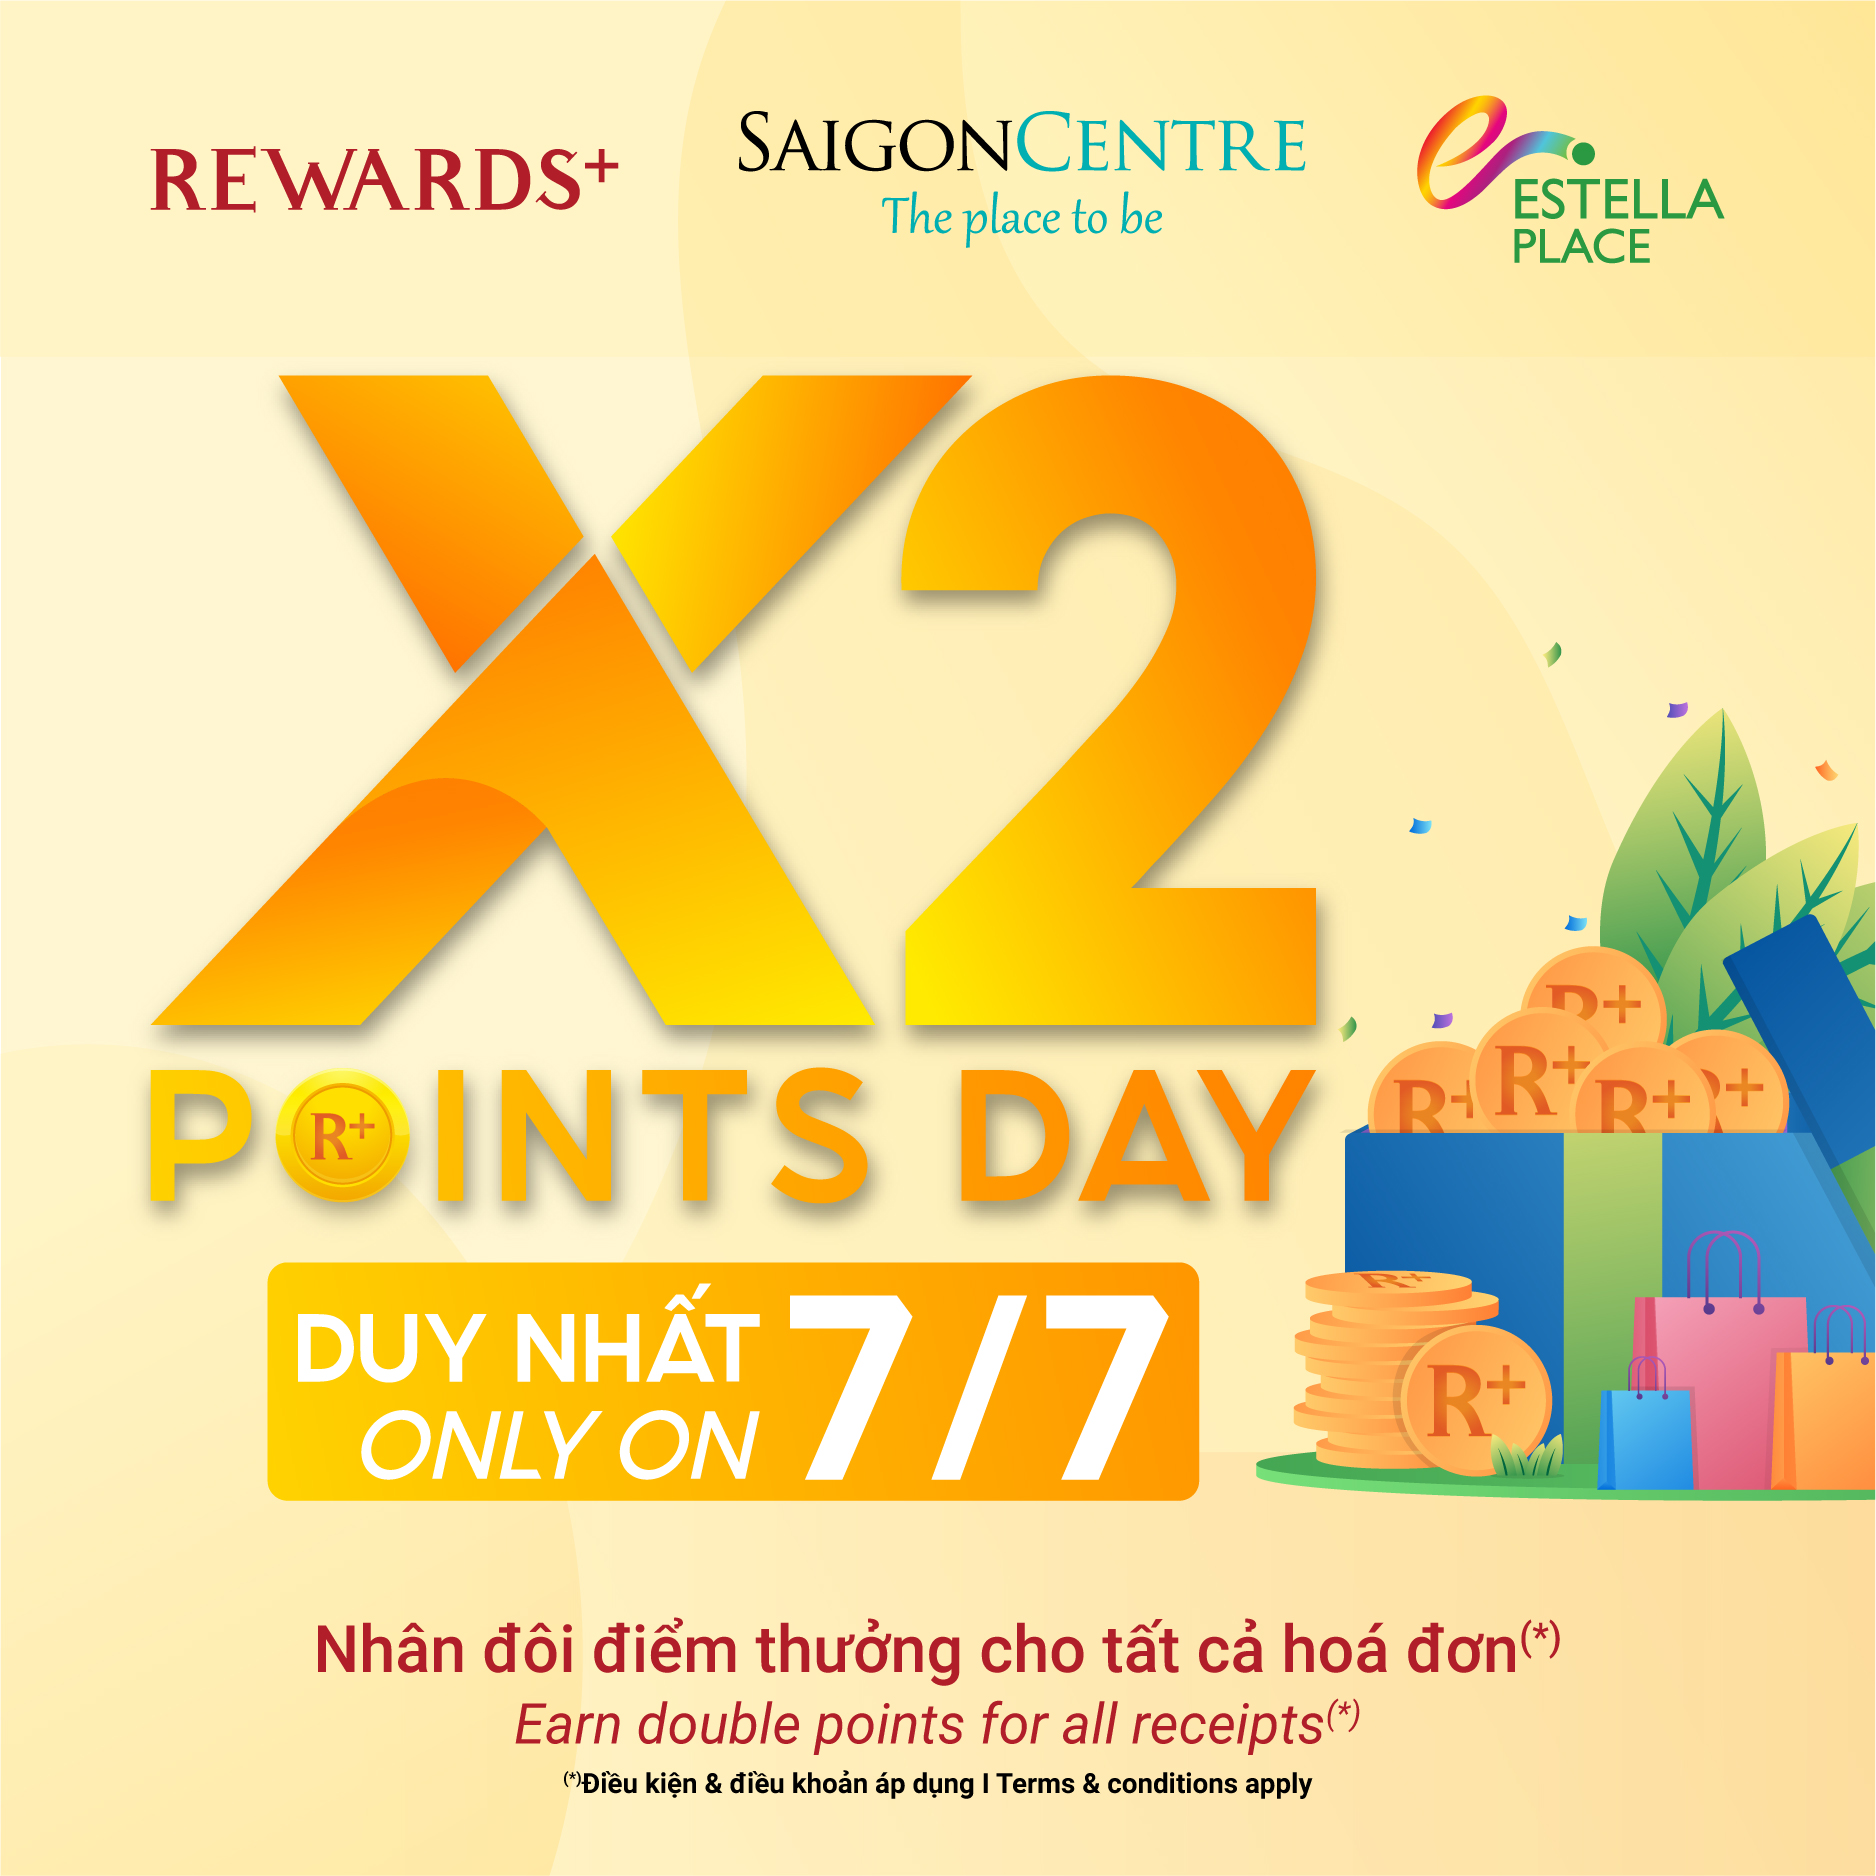 EARN DOUBLE POINTS FOR ALL RECEIPTS ON 7/7